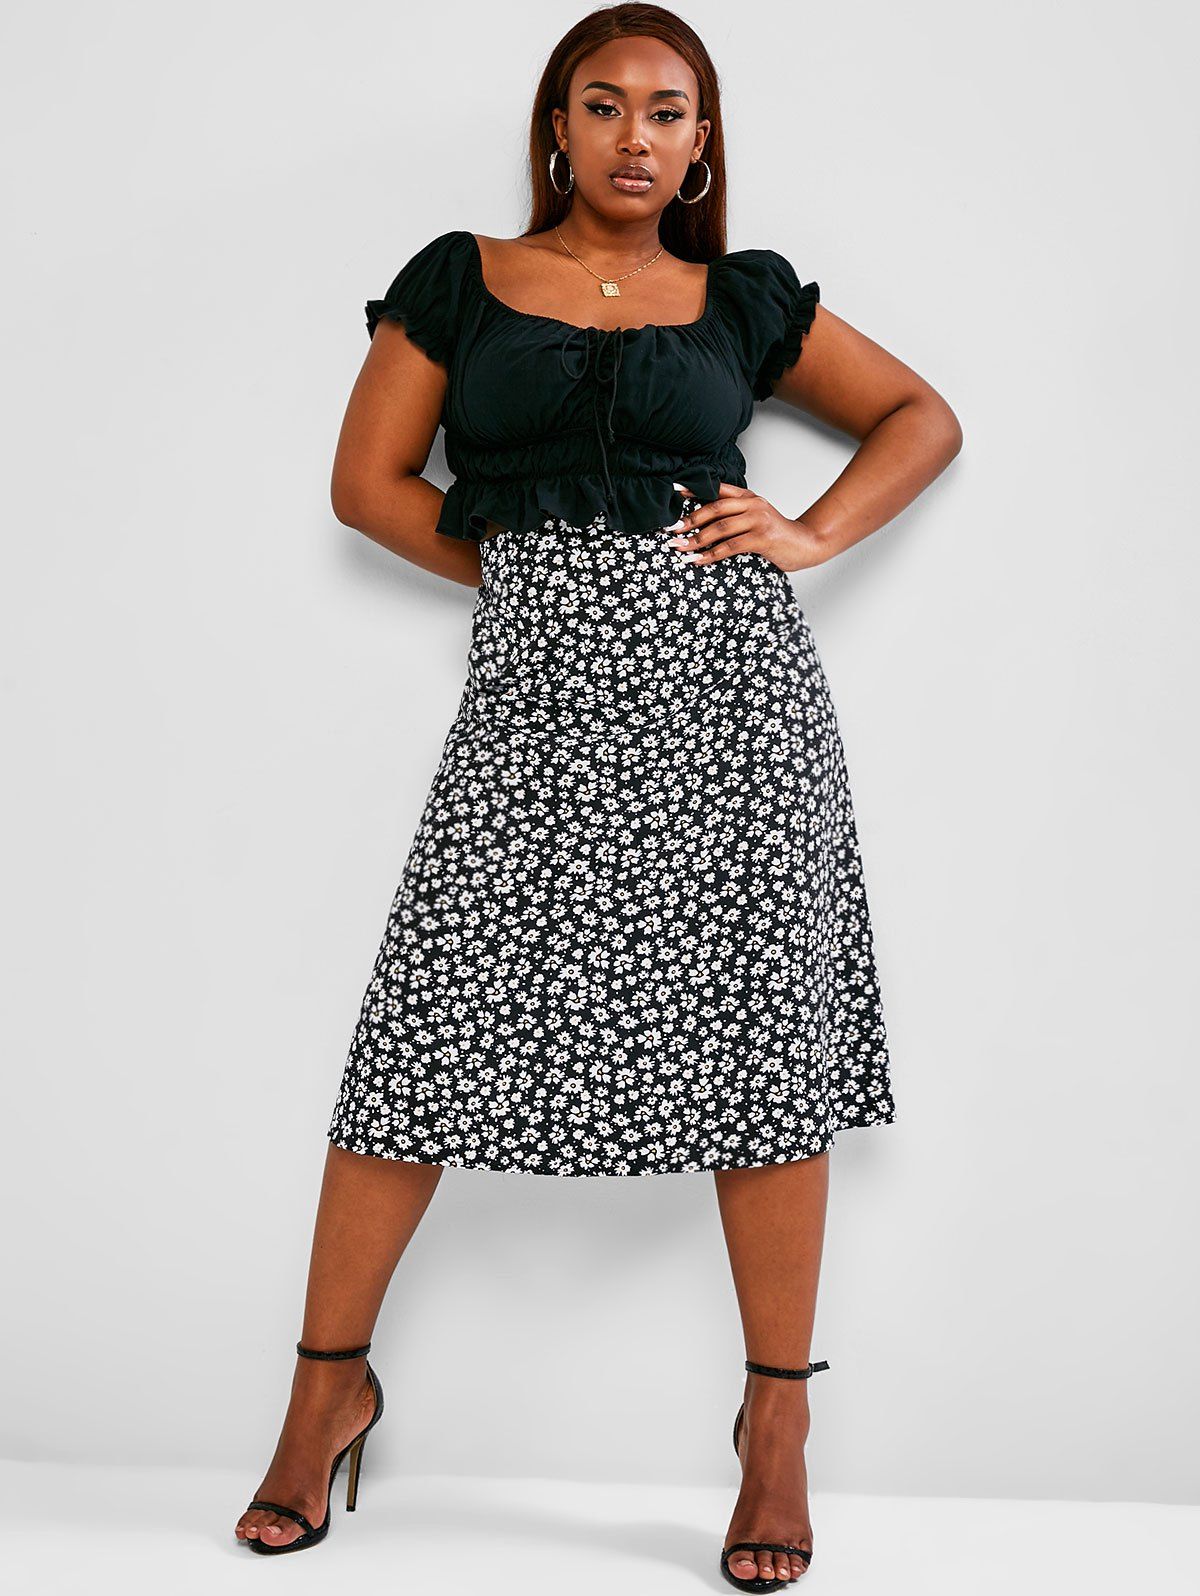 Plus Size Cinched Ruched Ditsy Print Two Piece Dress - BLACK L